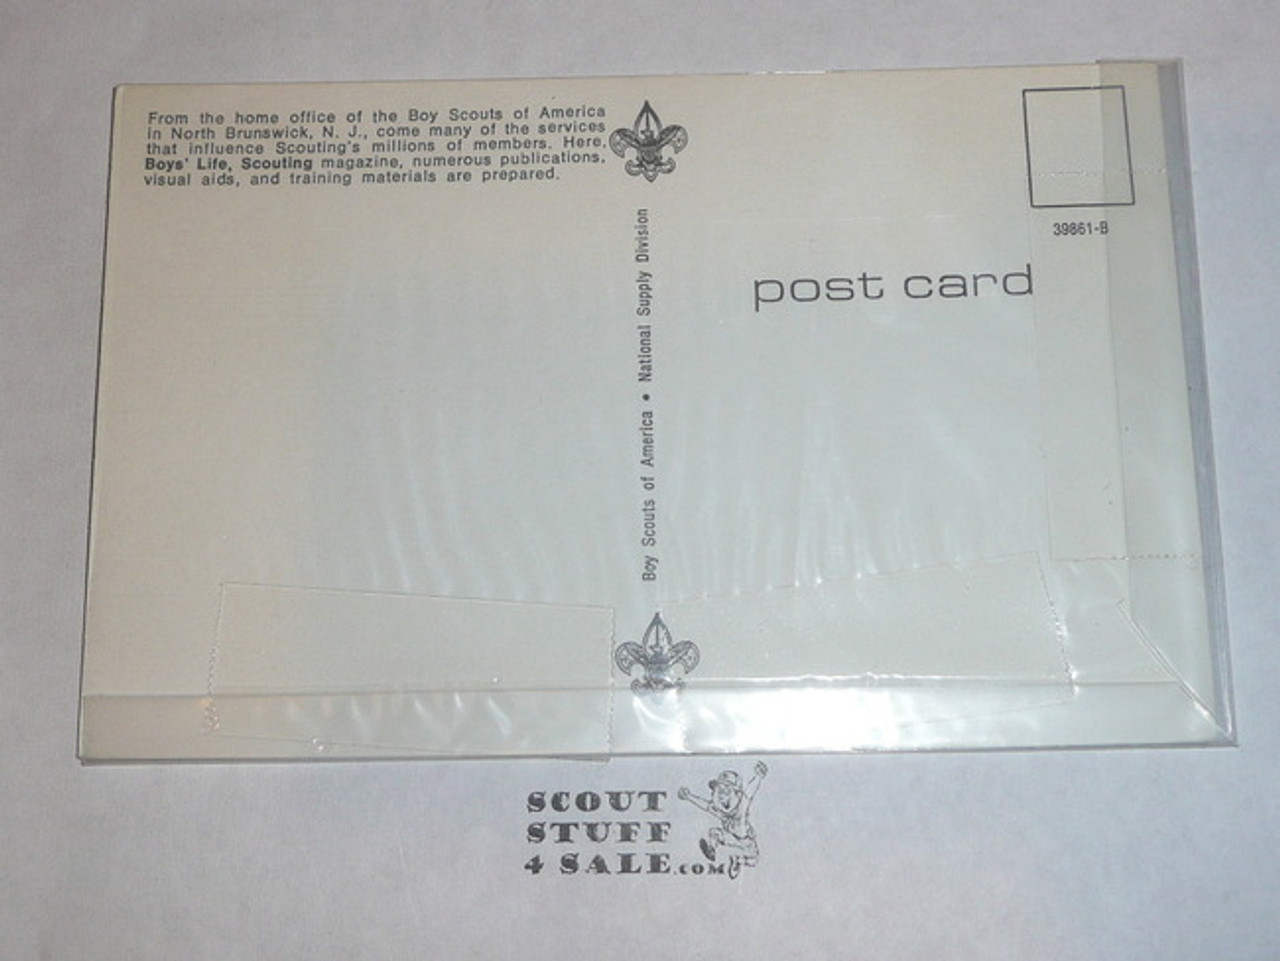 Boy Scouts of America National office in New Jersey Post Card